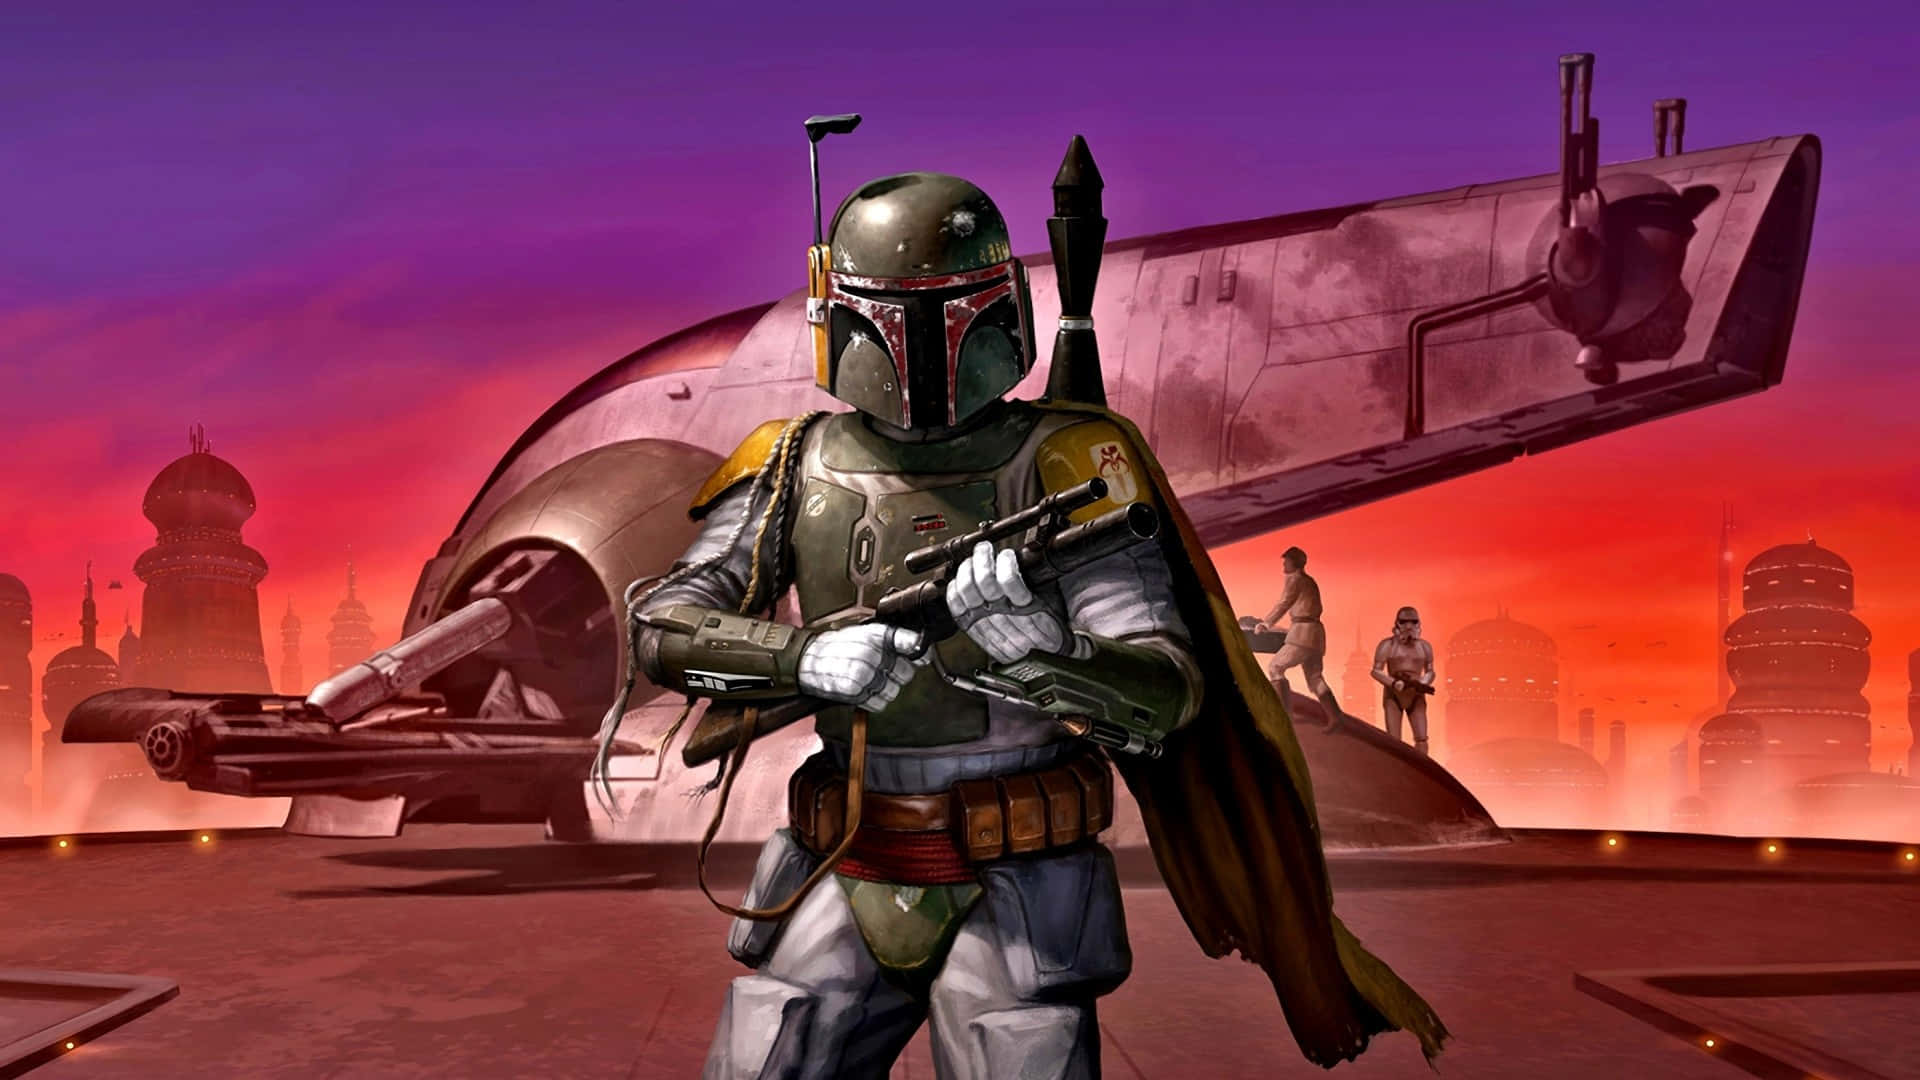 Intimidating Boba Fett with Blaster in Action